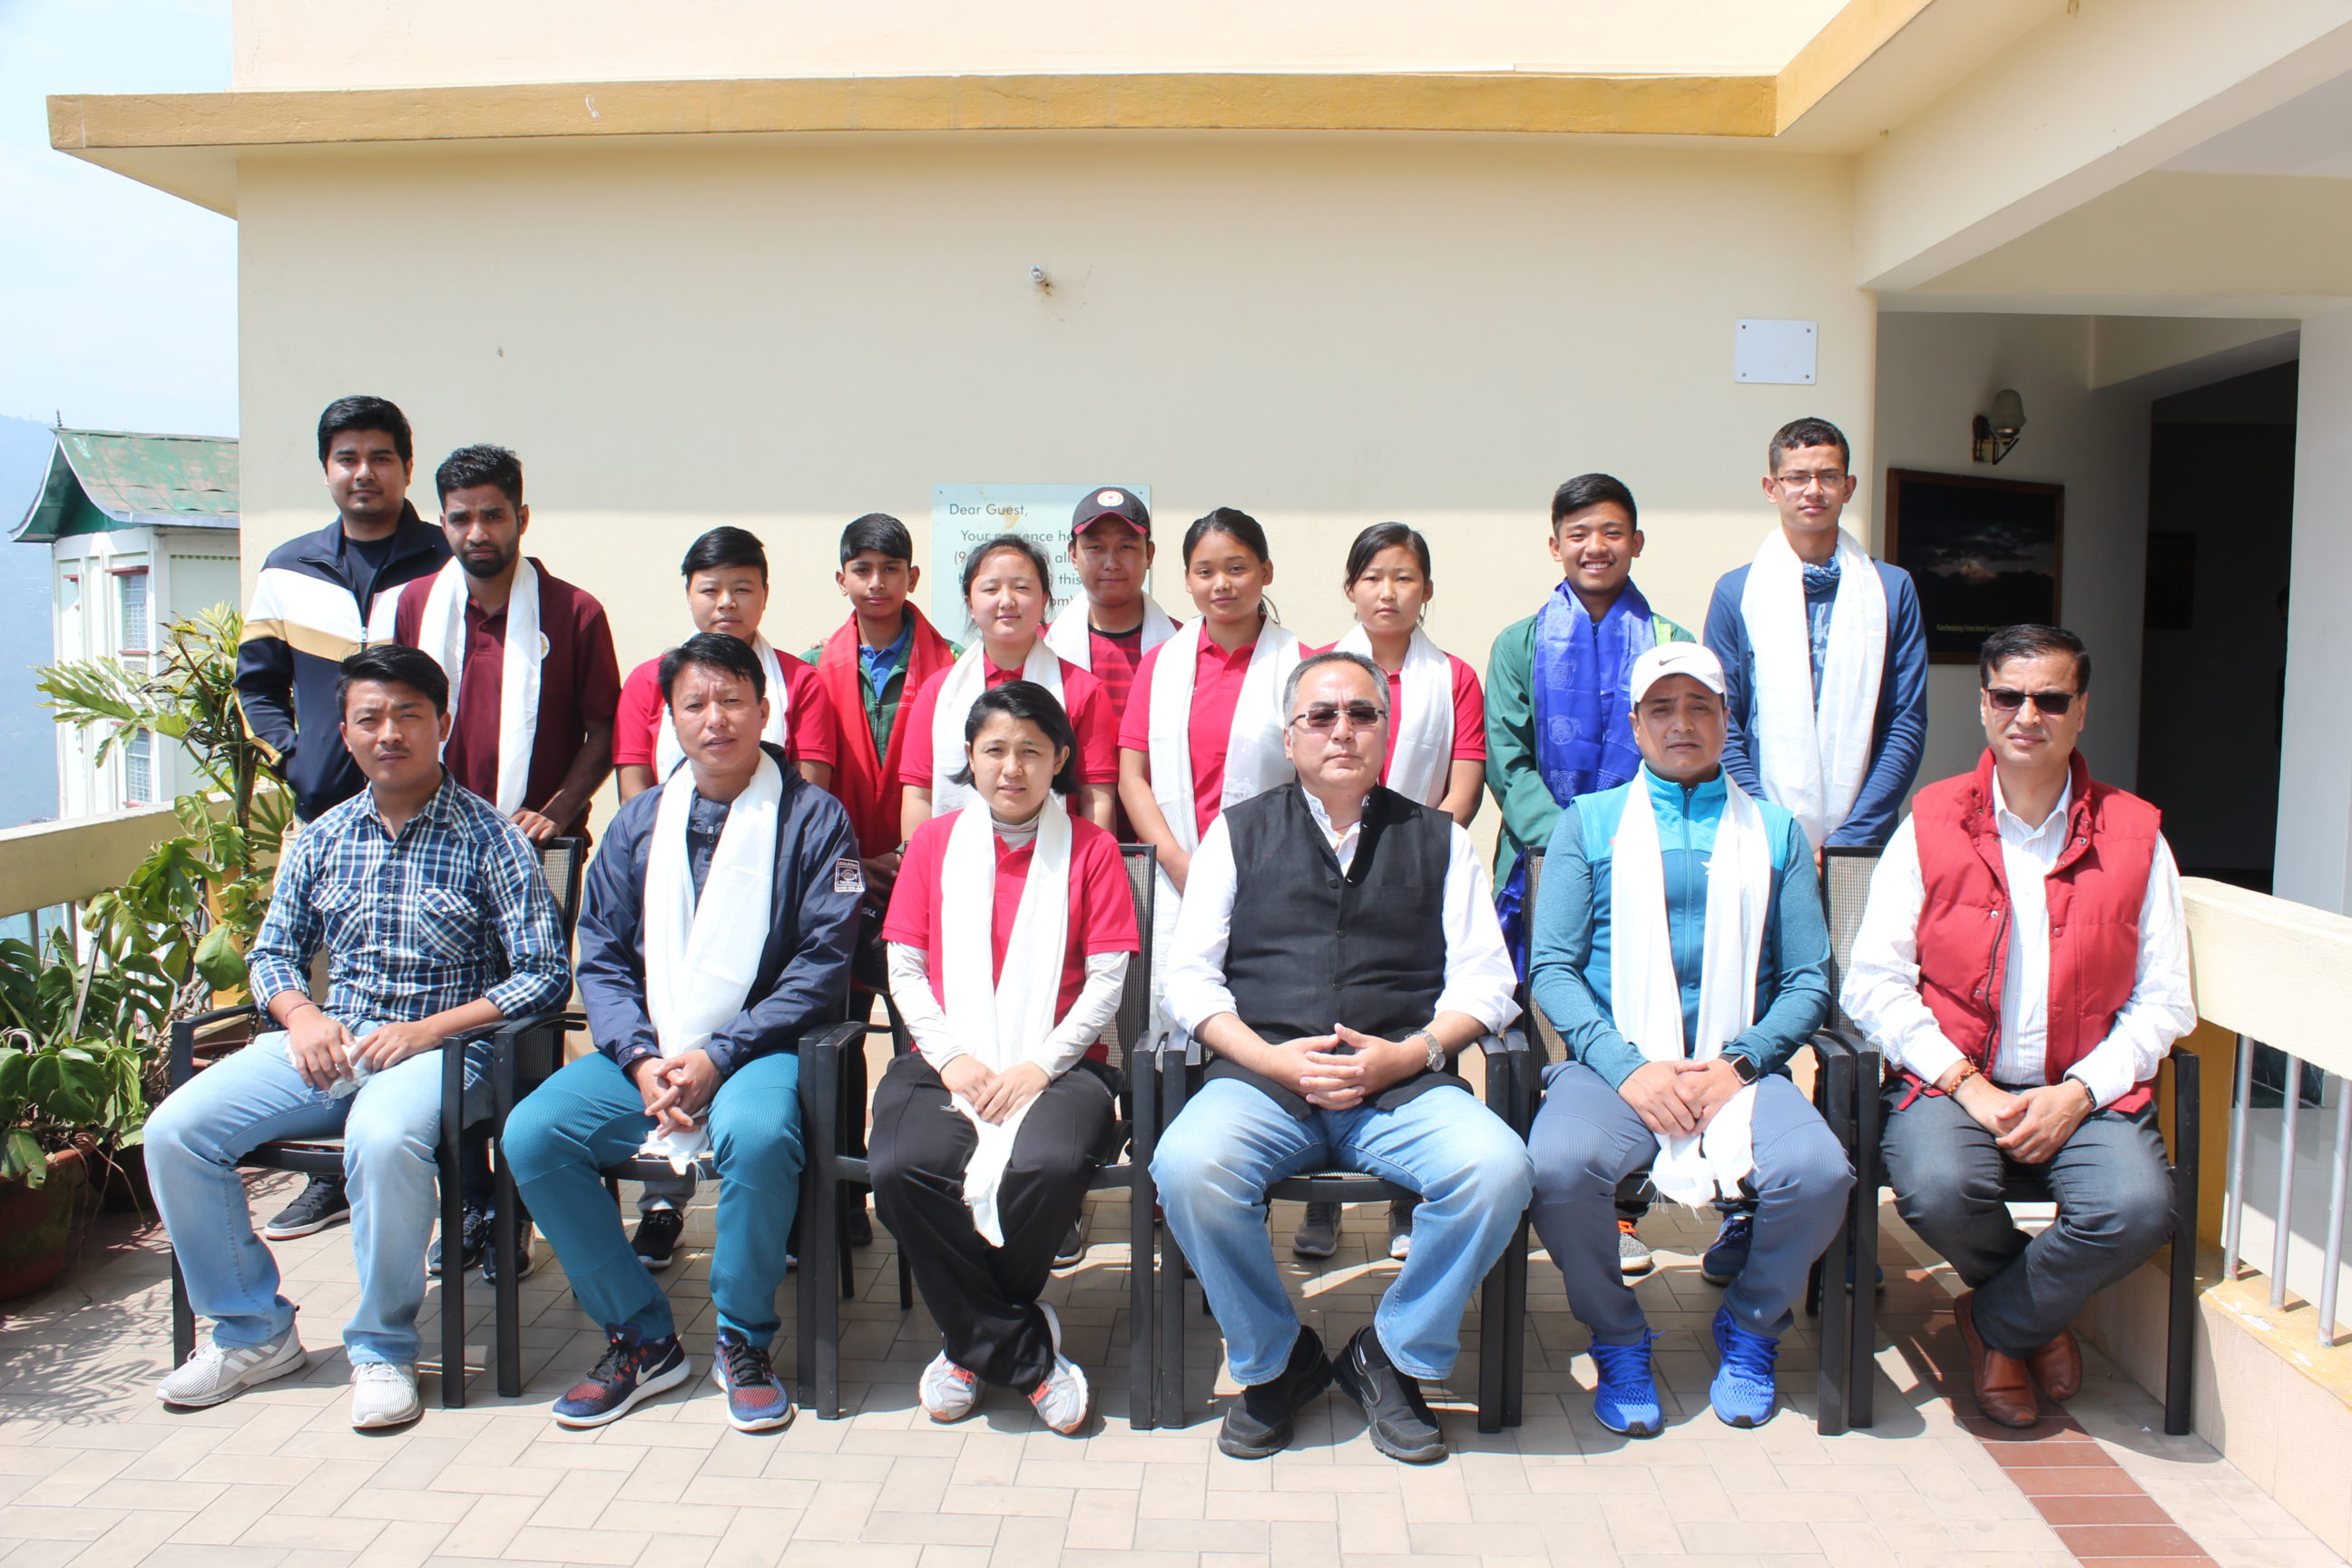 SCA hosts farewell lunch for players selected for Zonal Cricket Camp 2018